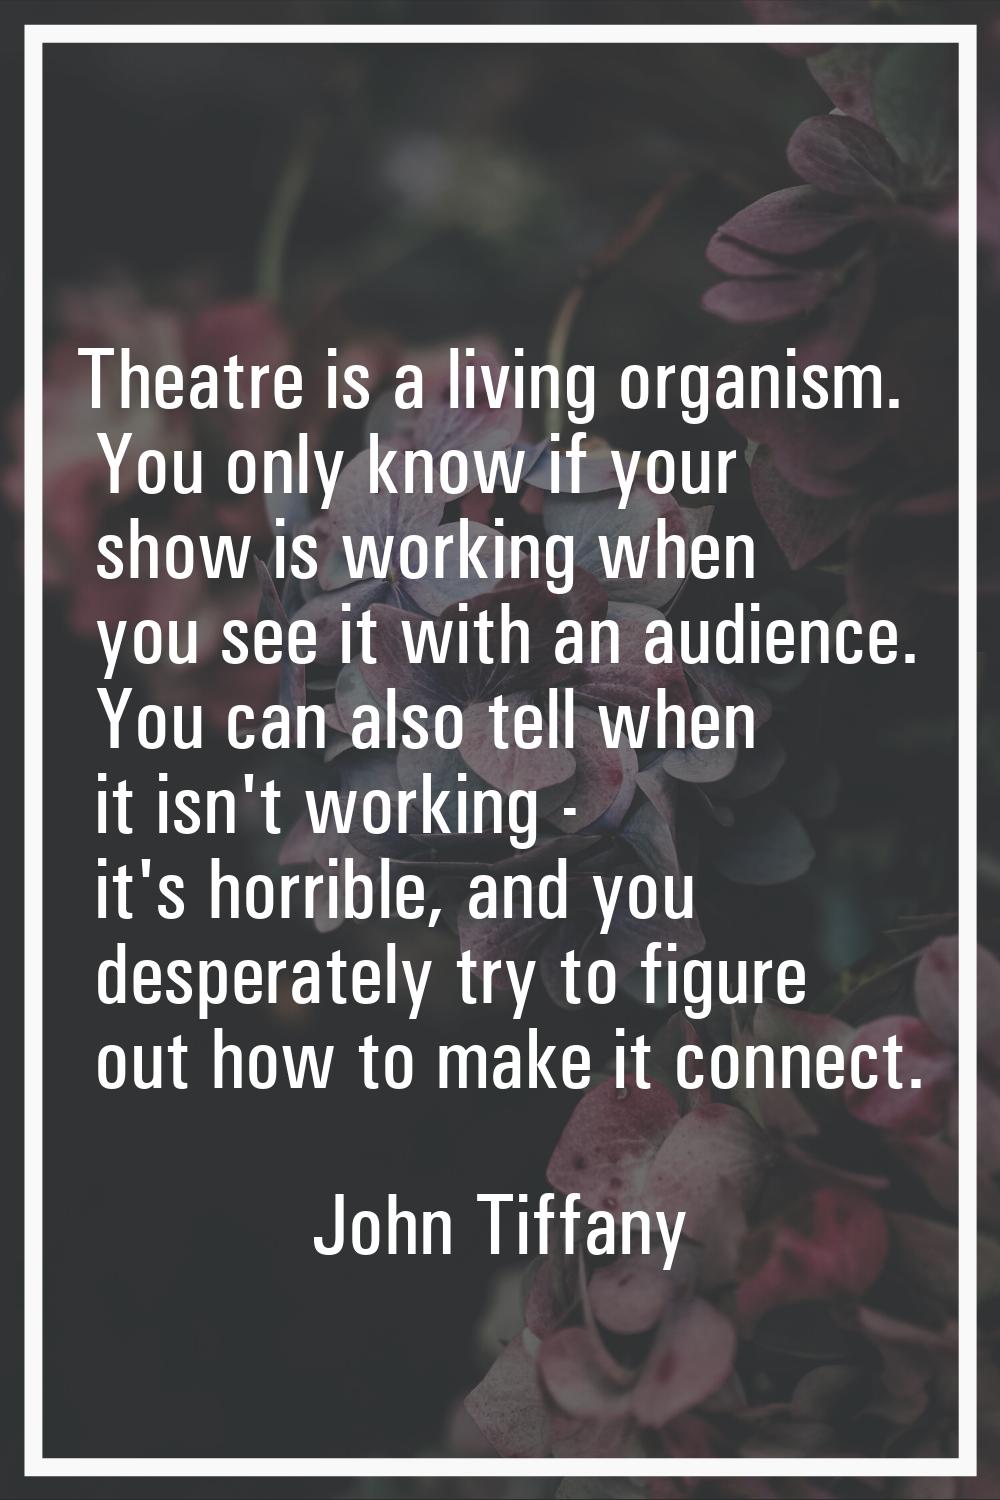 Theatre is a living organism. You only know if your show is working when you see it with an audienc